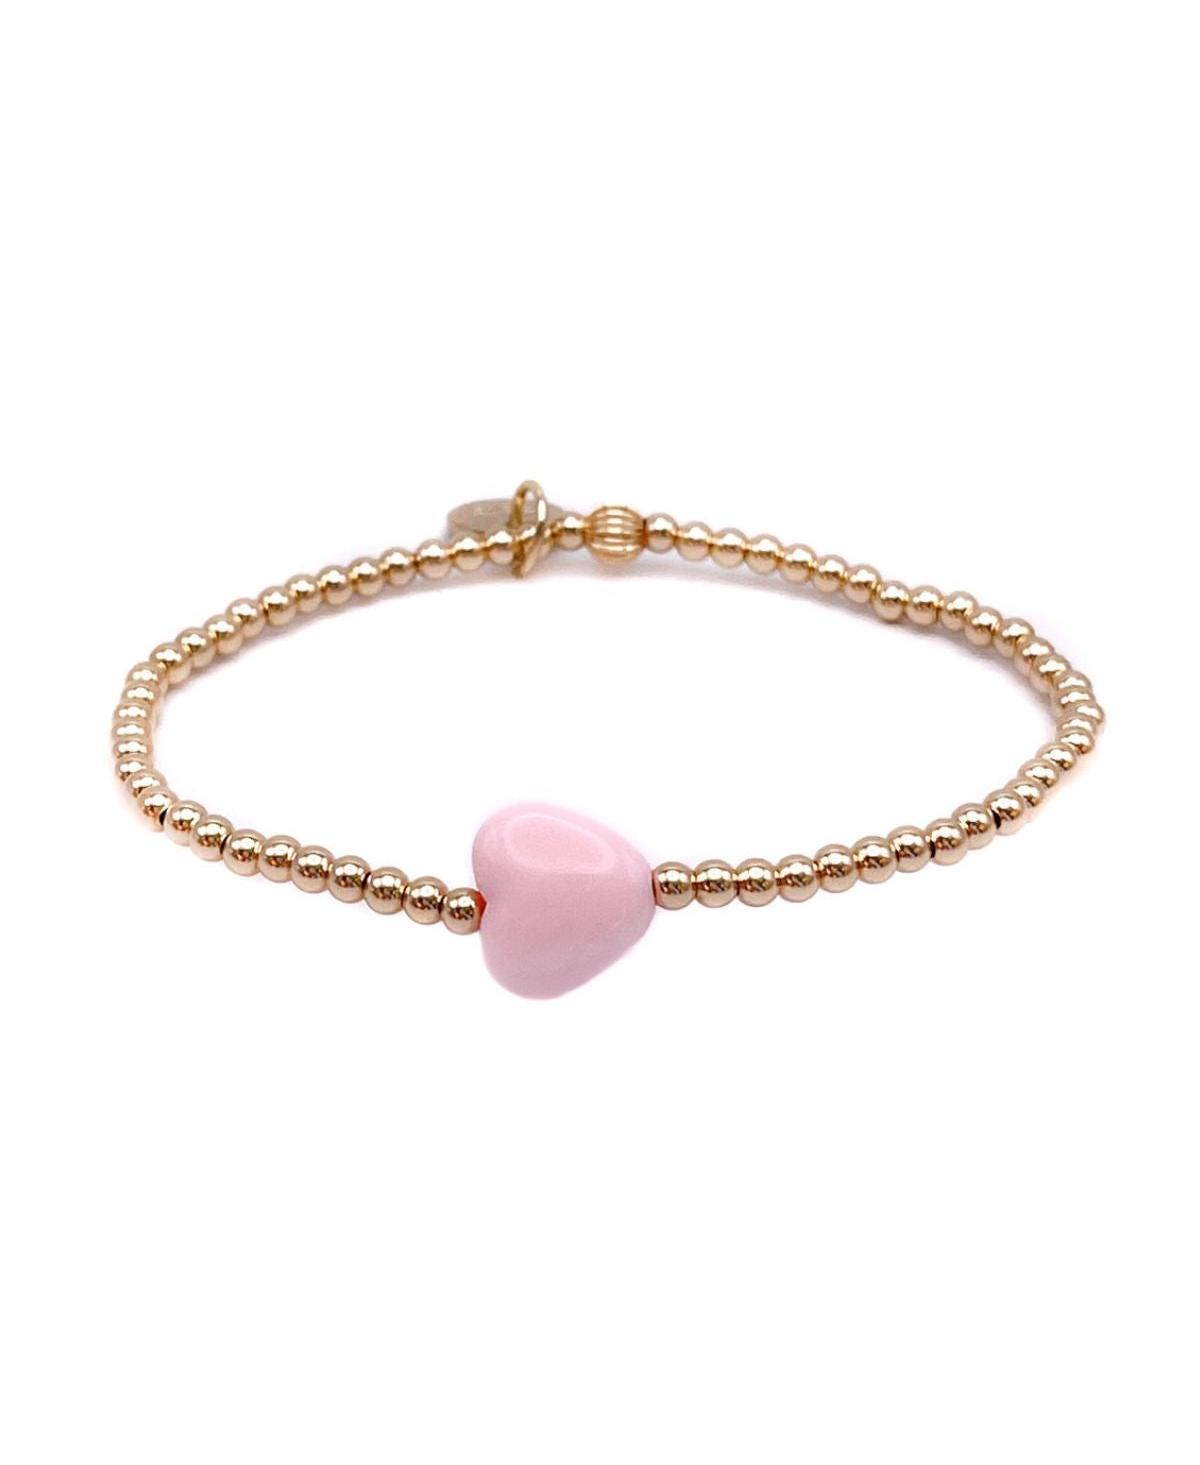 Non-Tarnishing Gold filled, 3mm Gold Ball and Pink Heart Stretch Bracelet - Gold  pink